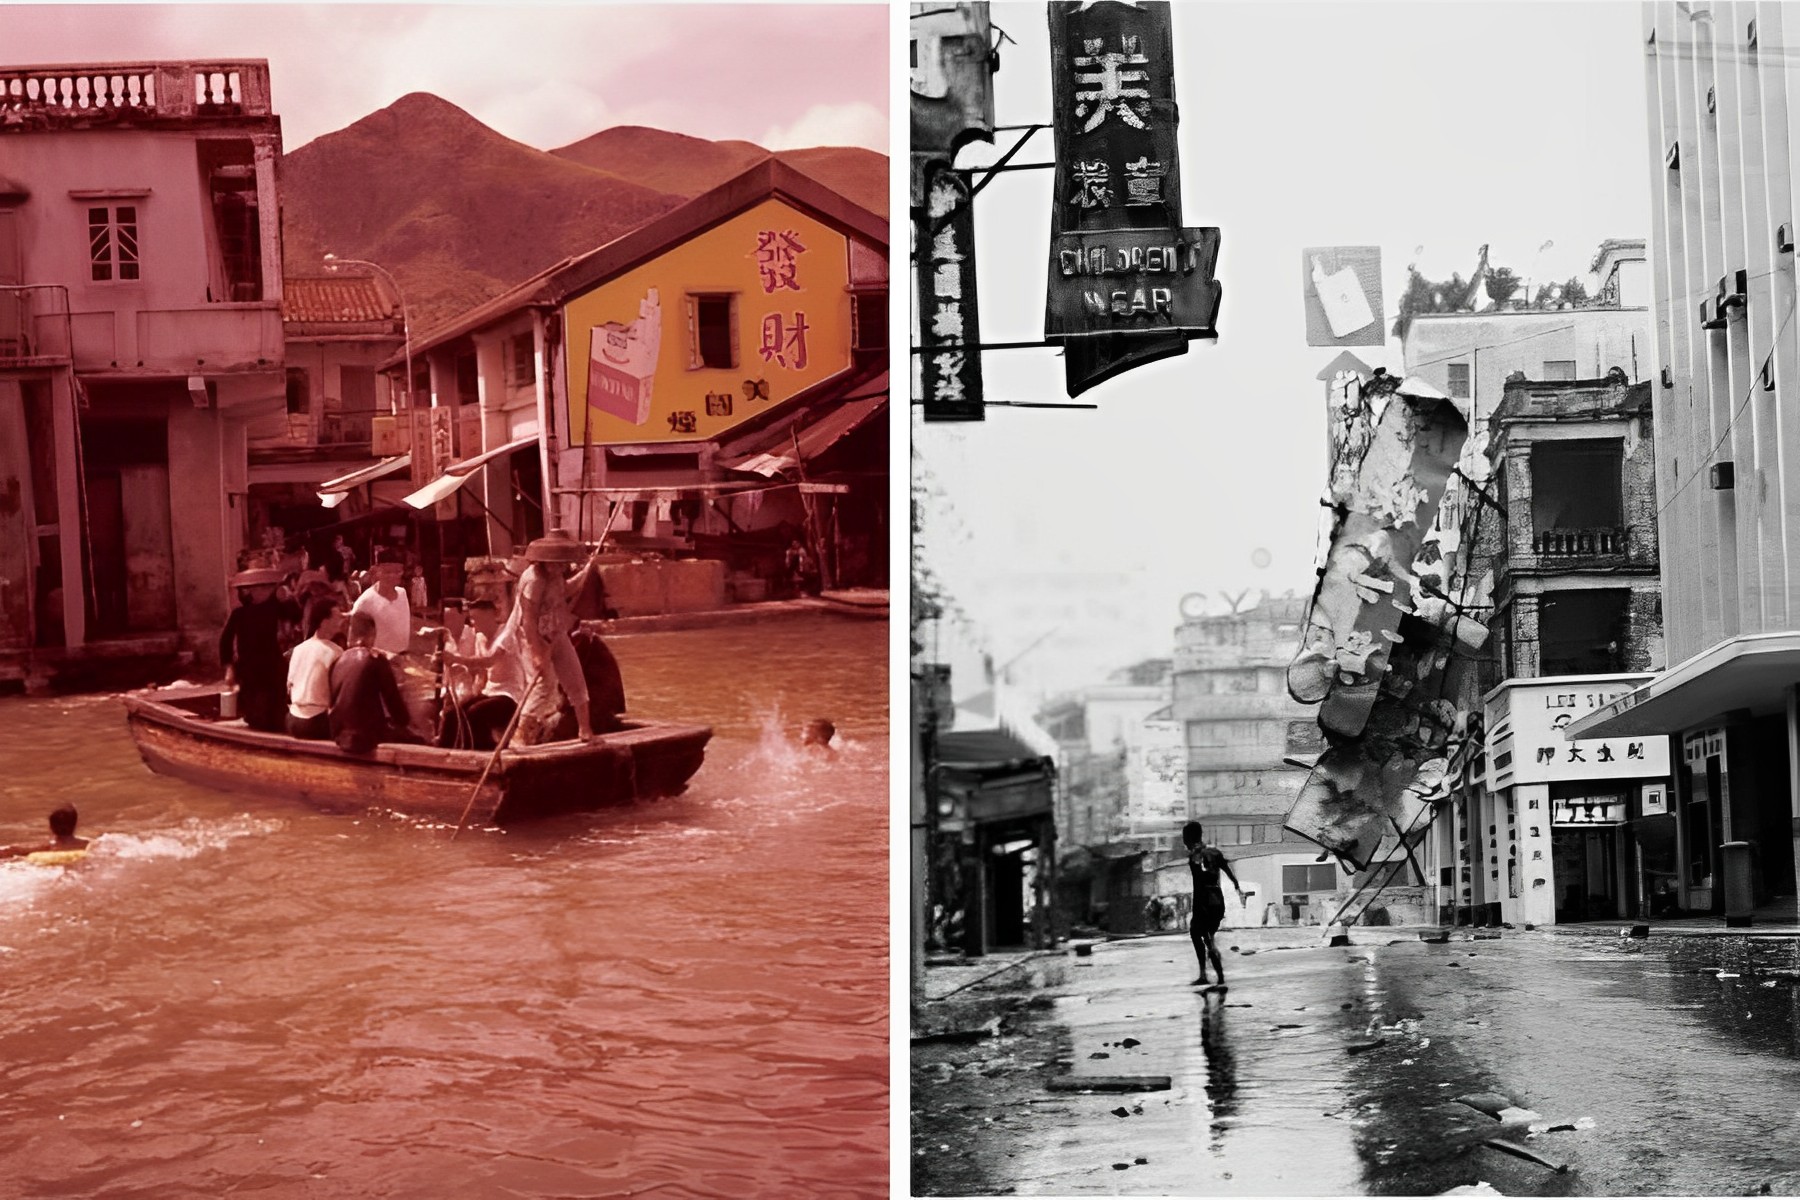 A collage showing two images of the damage Hong Kong sustained after being hit by Typhoon Wanda. The image on the right shows people using a rowboat to navigate the city's flooded streets. The black-and-white image on the right shows a person in the middle of a deserted street in a commercial area. A signboard hangs precariously off a building, while another is badly damaged.